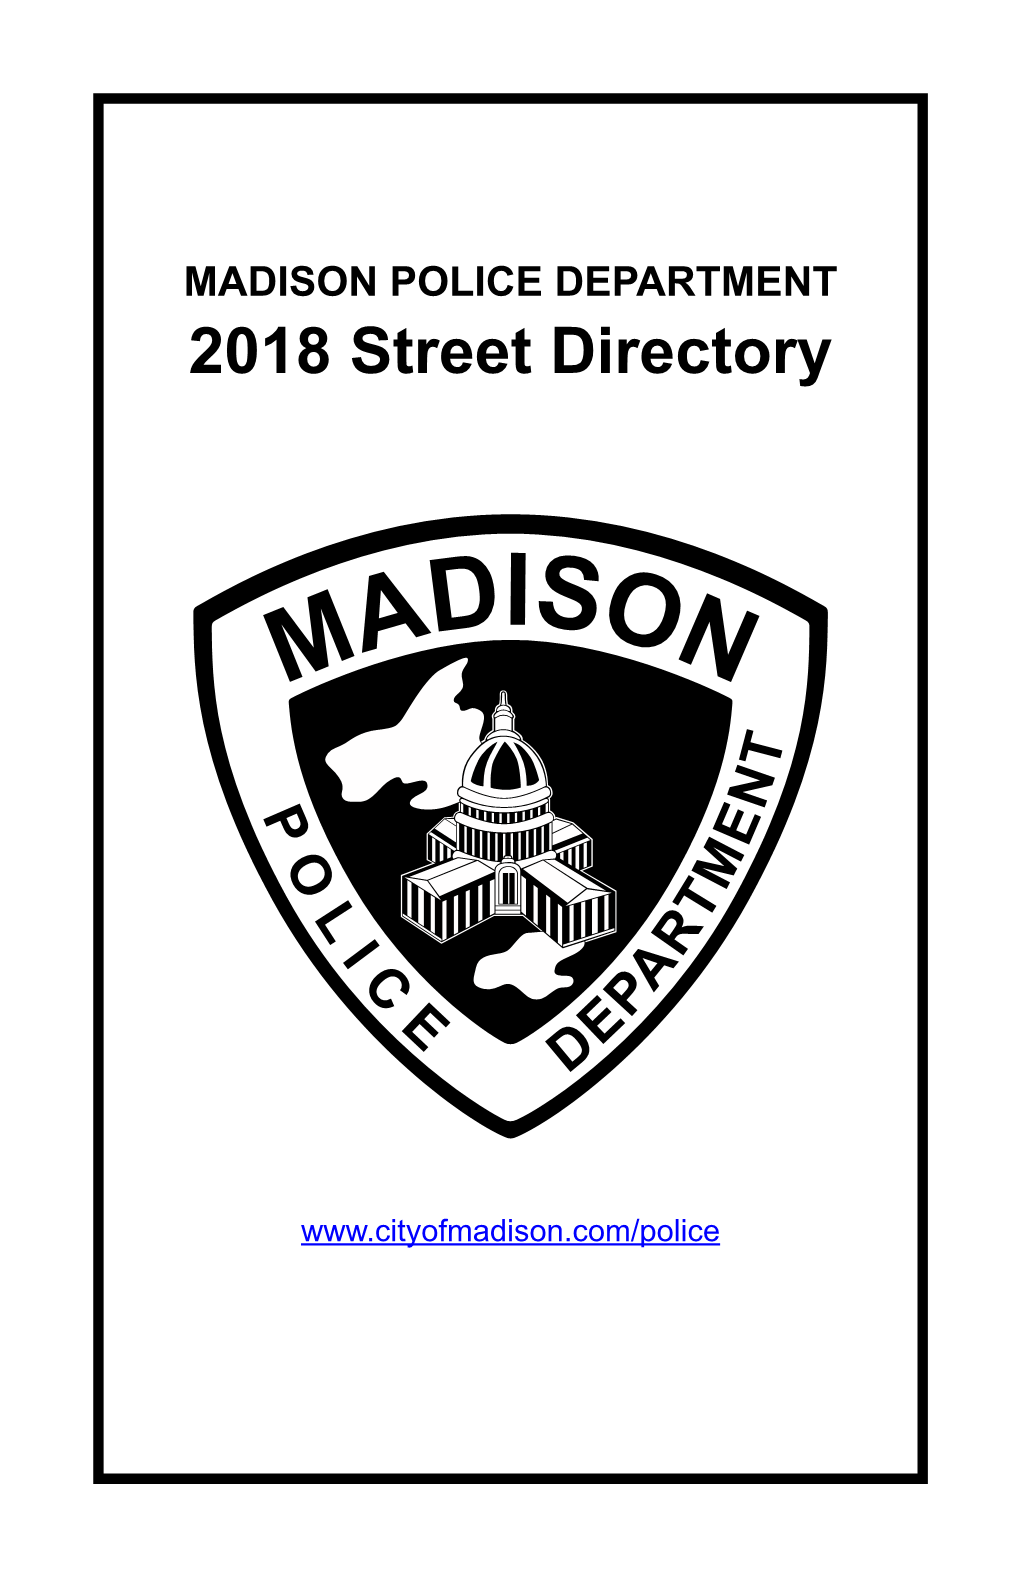 MADISON POLICE DEPARTMENT 2018 Street Directory